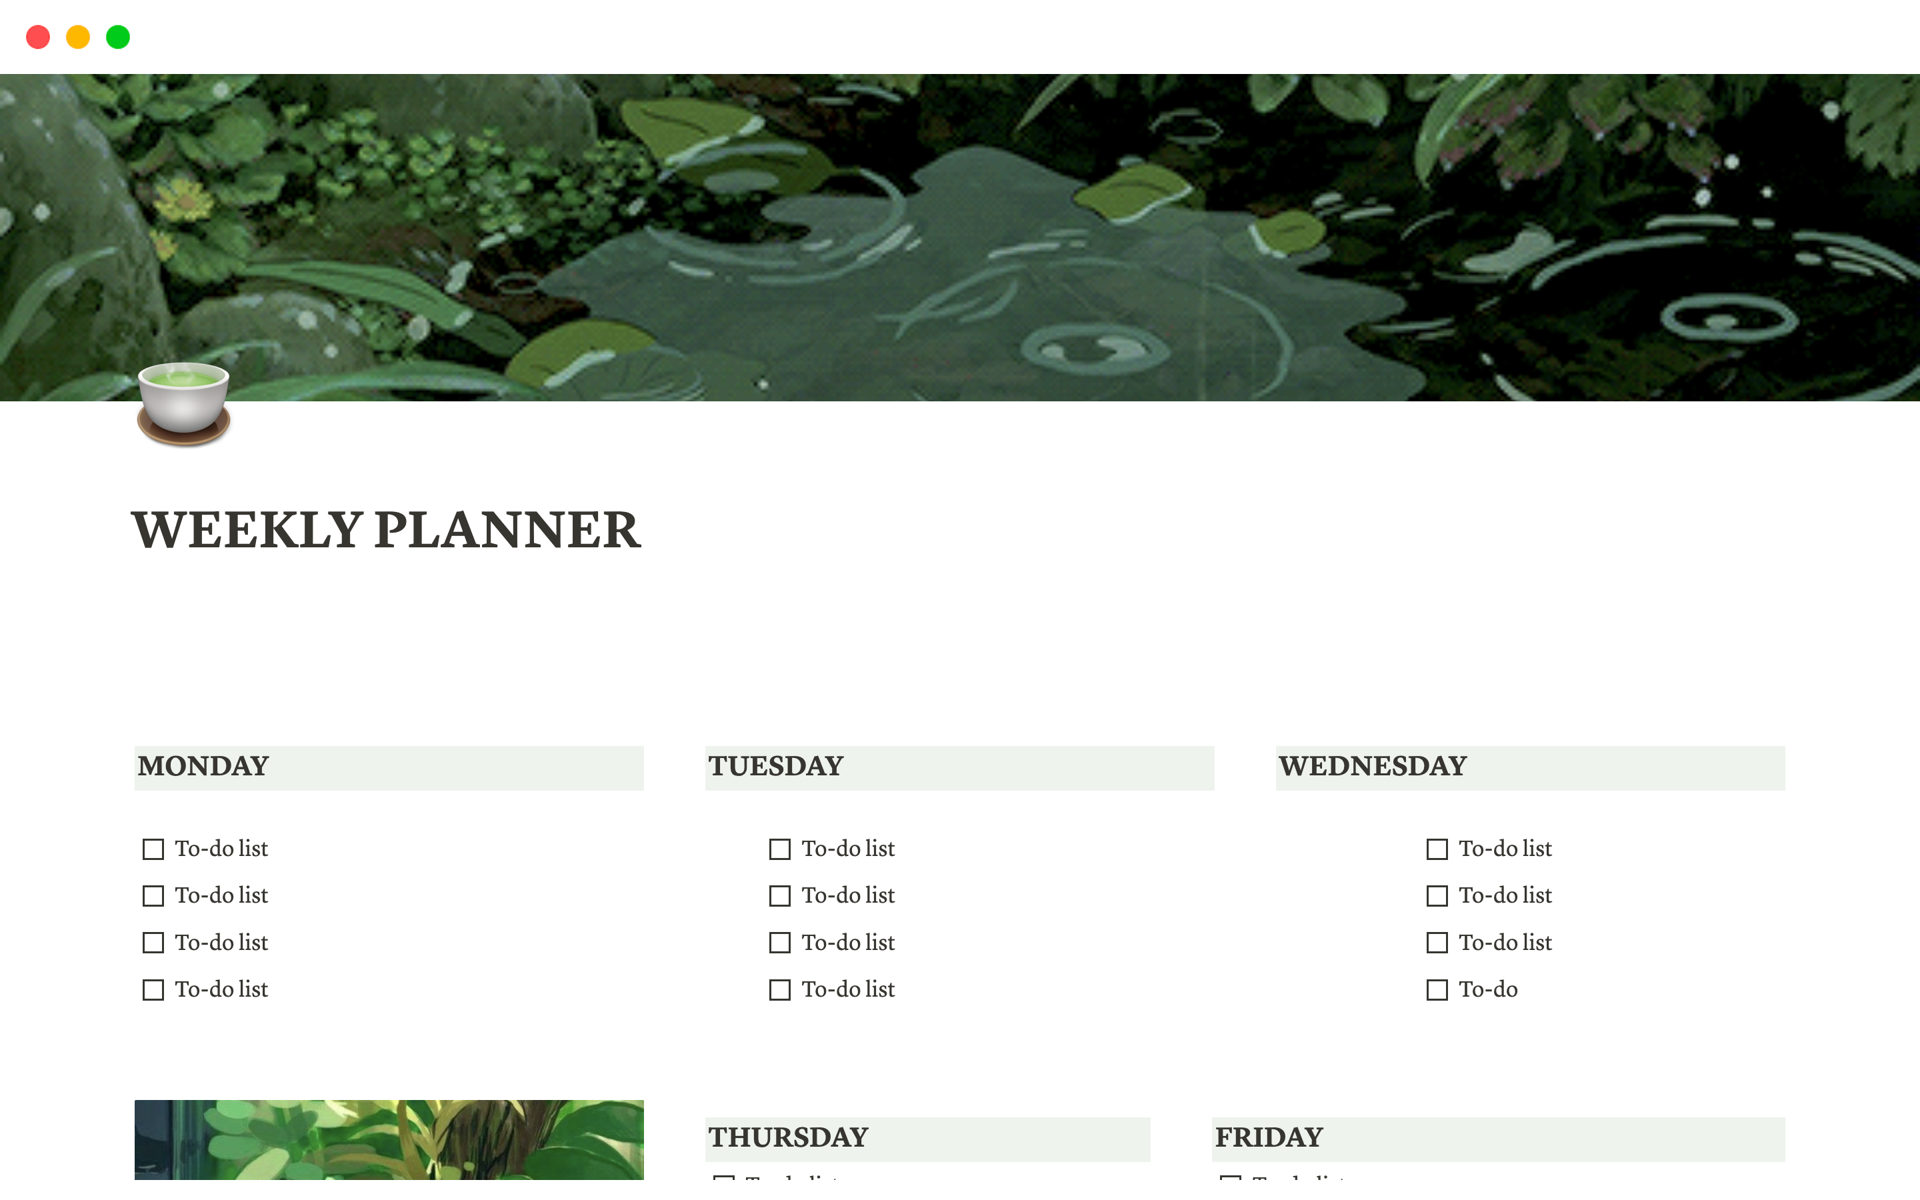 This weekly planner helps with task prioritization .